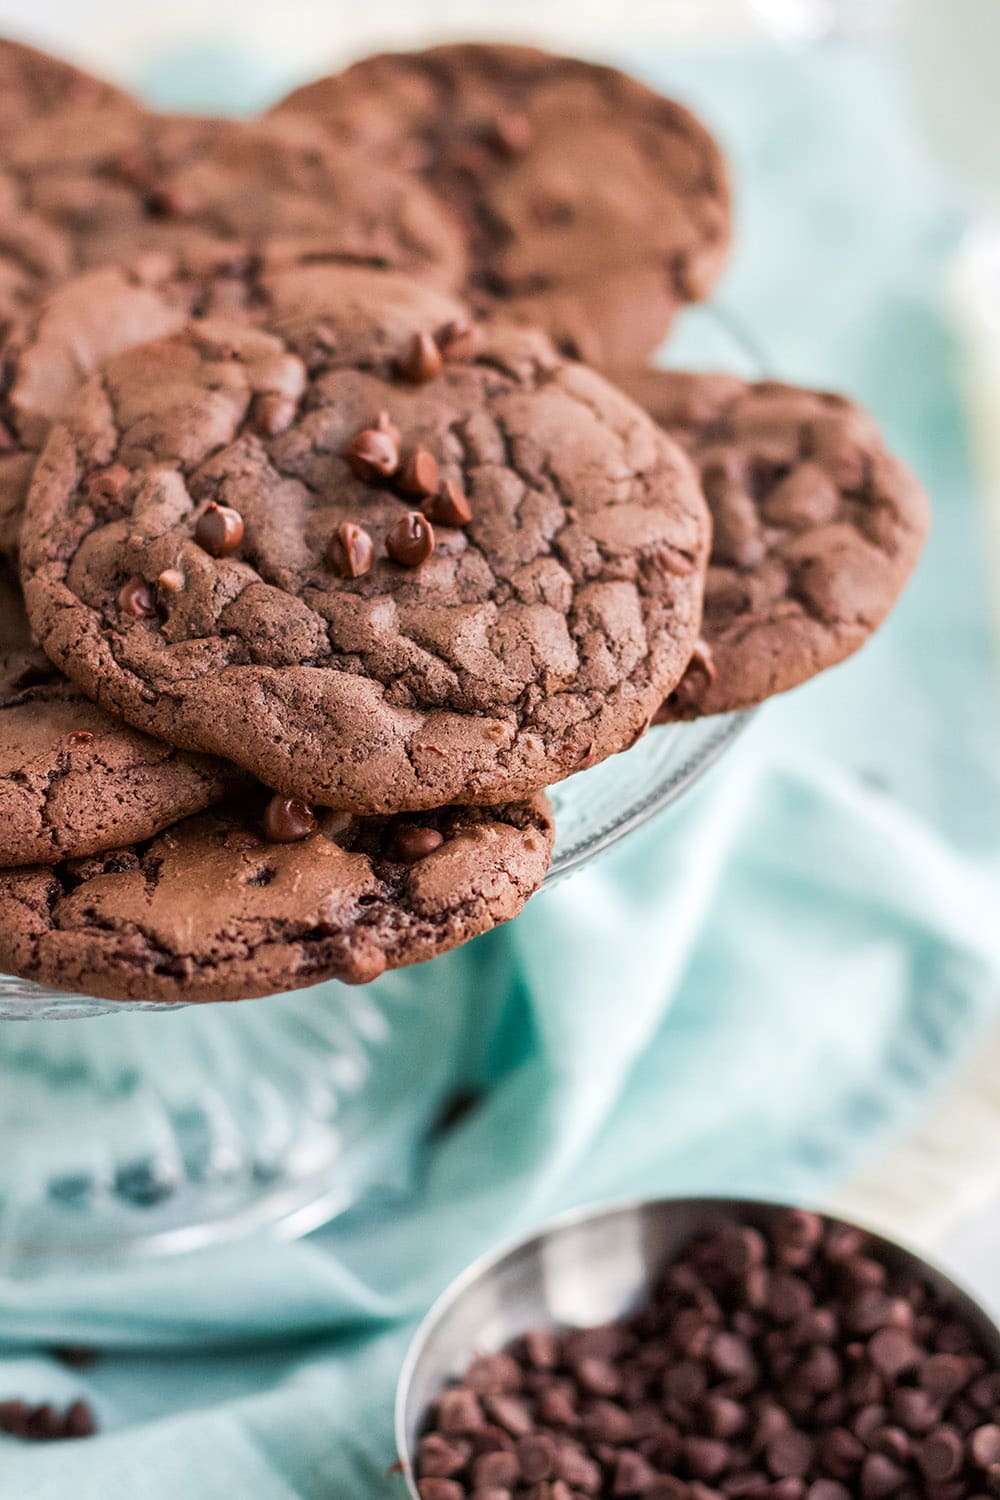 Brownie cookies on a plate by chocolate chips.